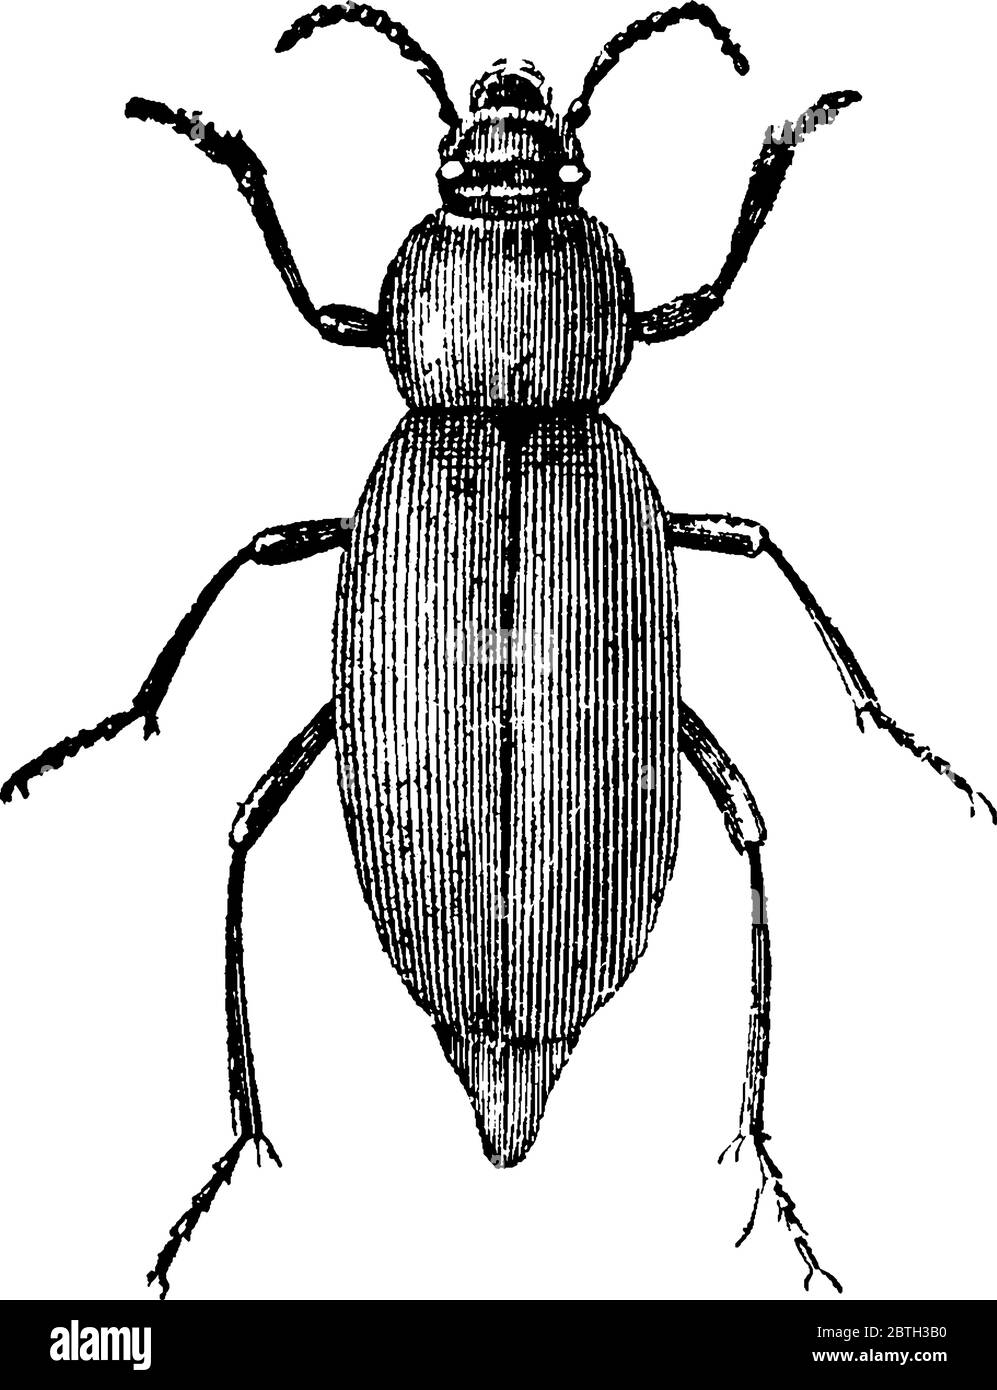 Churchyard Beetles have an oval shaped body tapering towards the end, with longitudinal stripe like markings, running all over their body, vintage lin Stock Vector